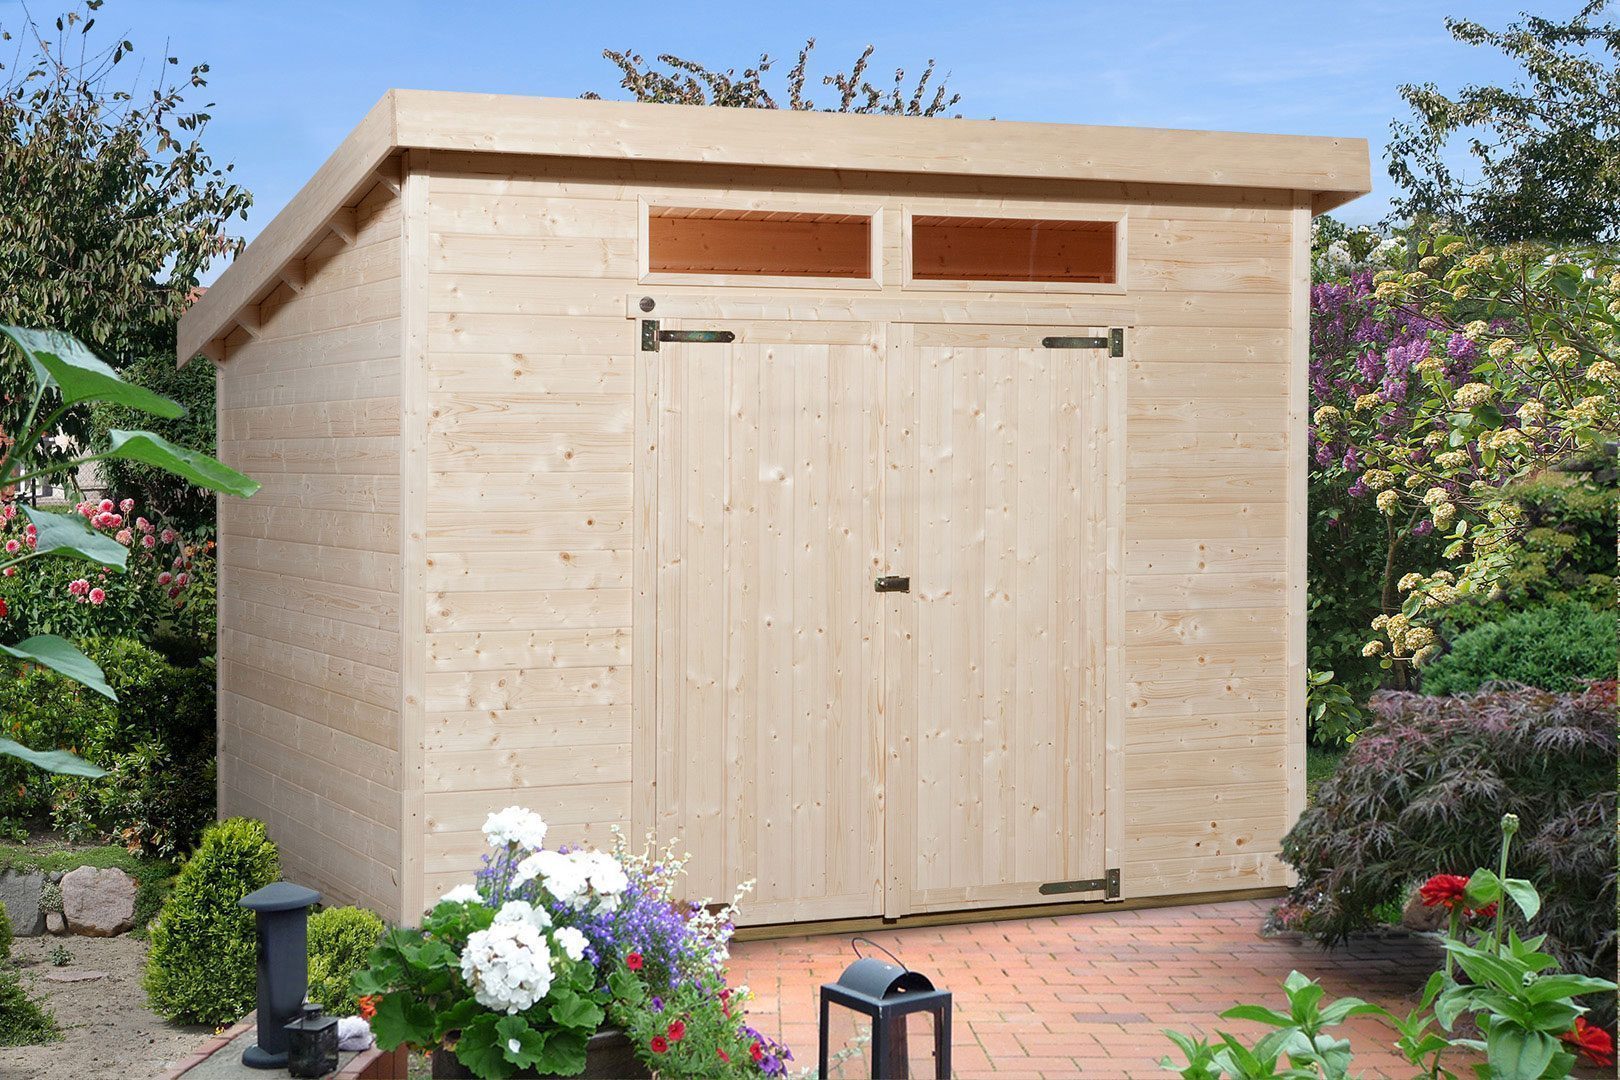 model Quality Shed WEKA A at from High Garden Switzerland 325 - Softub